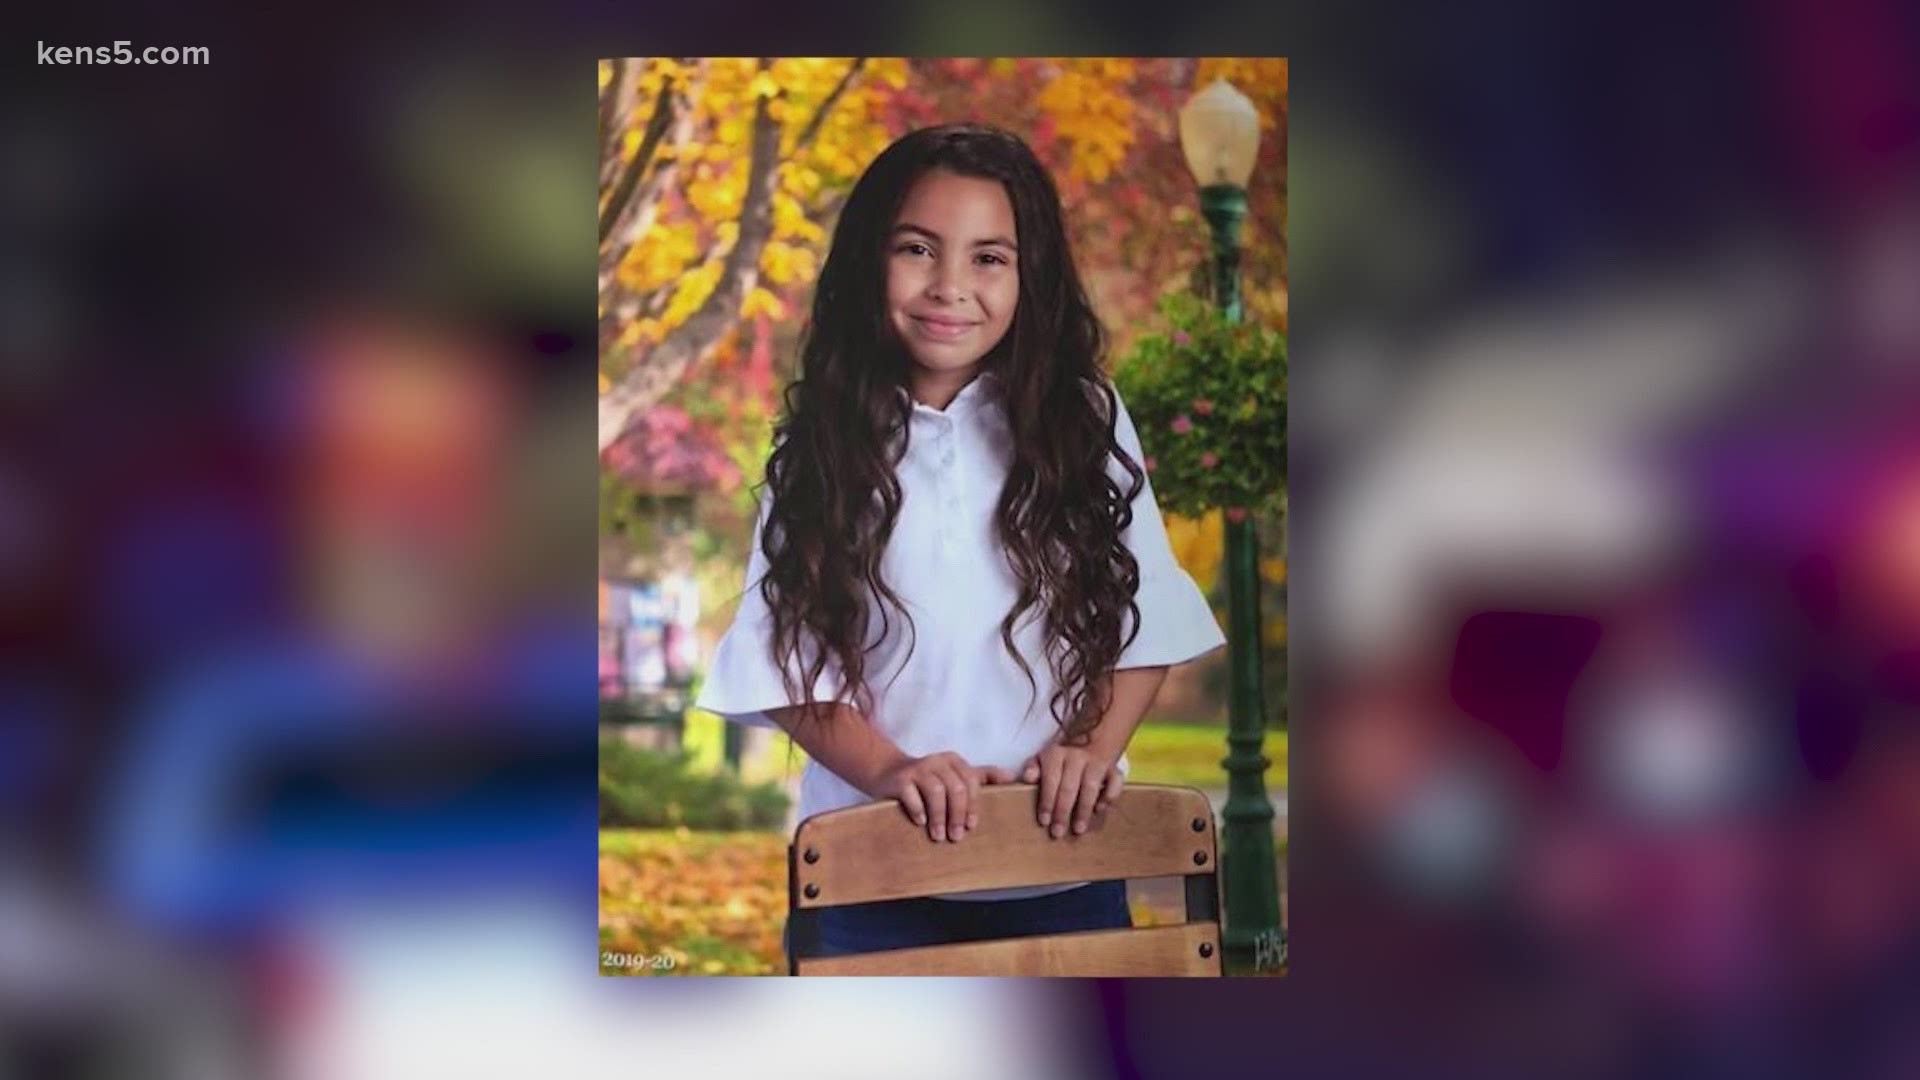 An 8-year-old Kerrville girl critically injured when a suspected drunk driver crashed into her bedroom has died, according to police.